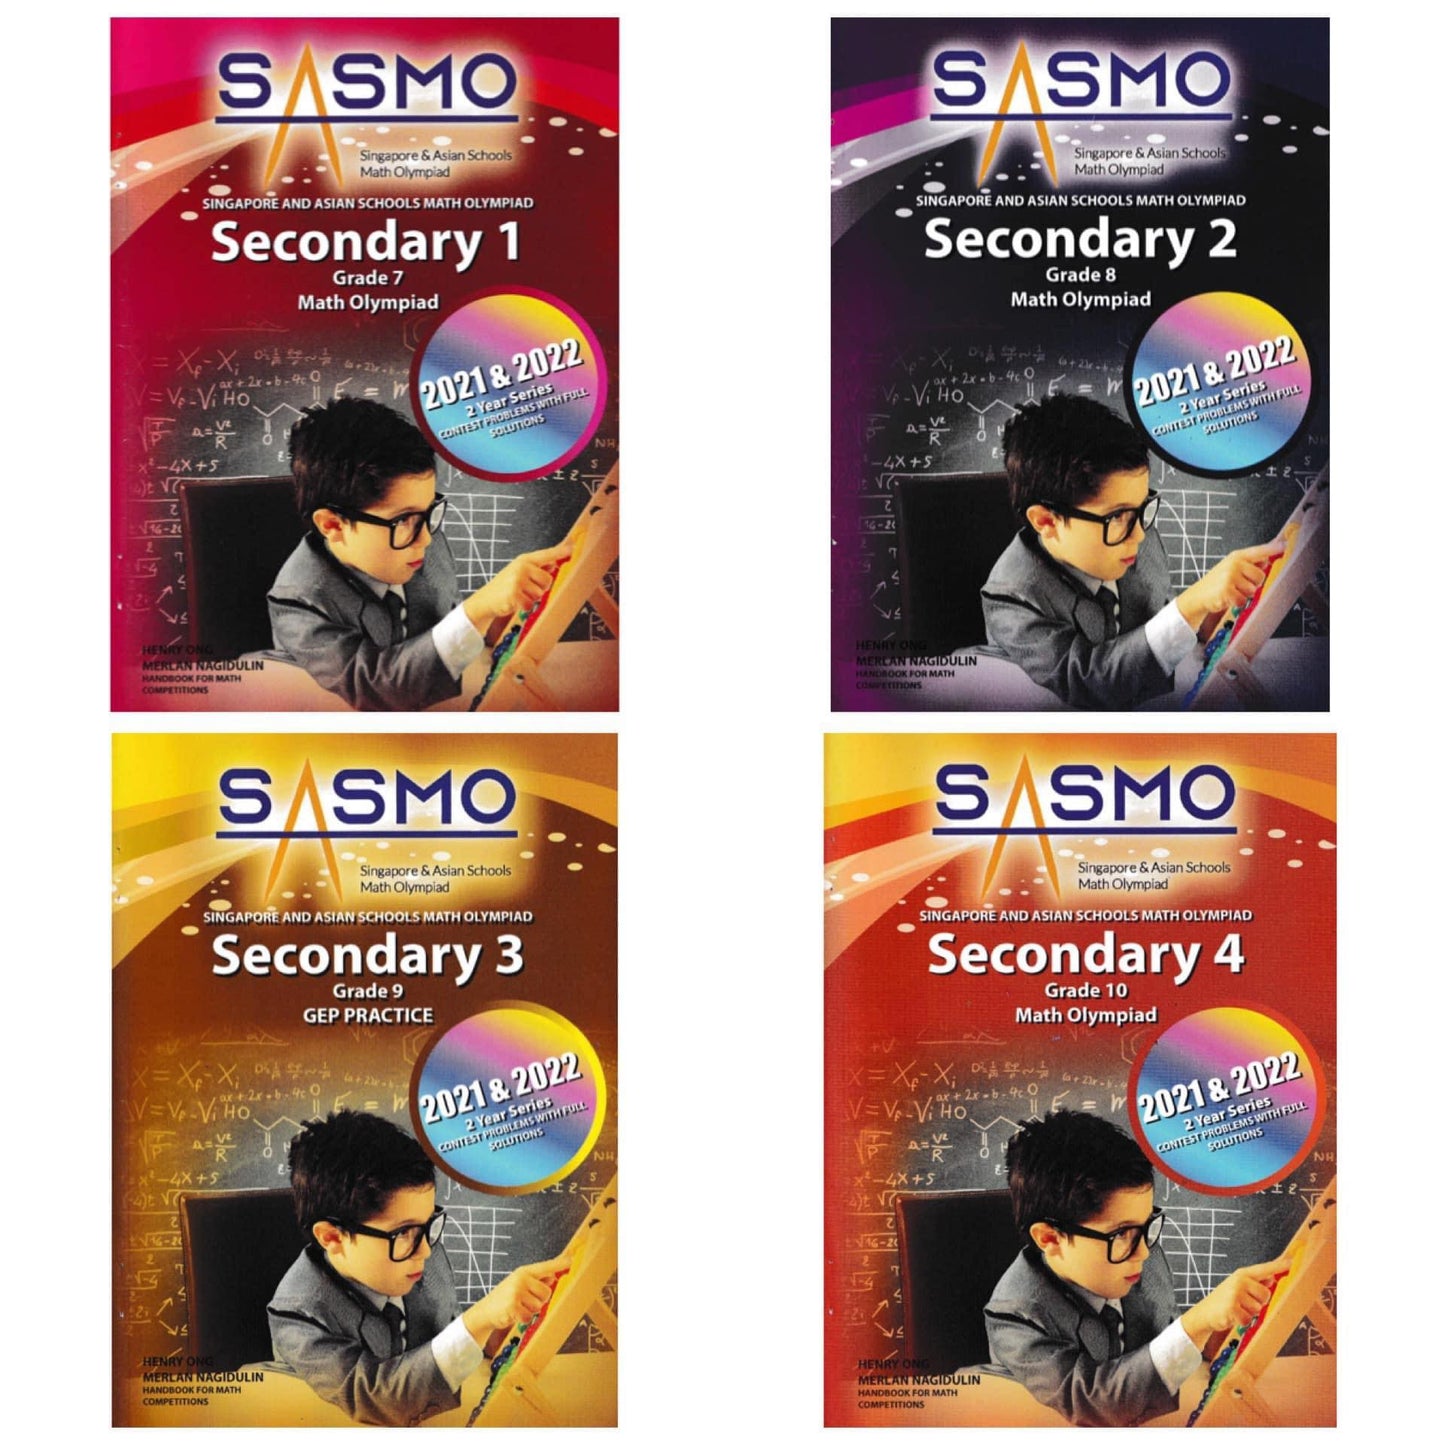 Singapore And Asian Schools Math Olympiad (SASMO) Papers for Secondary Levels